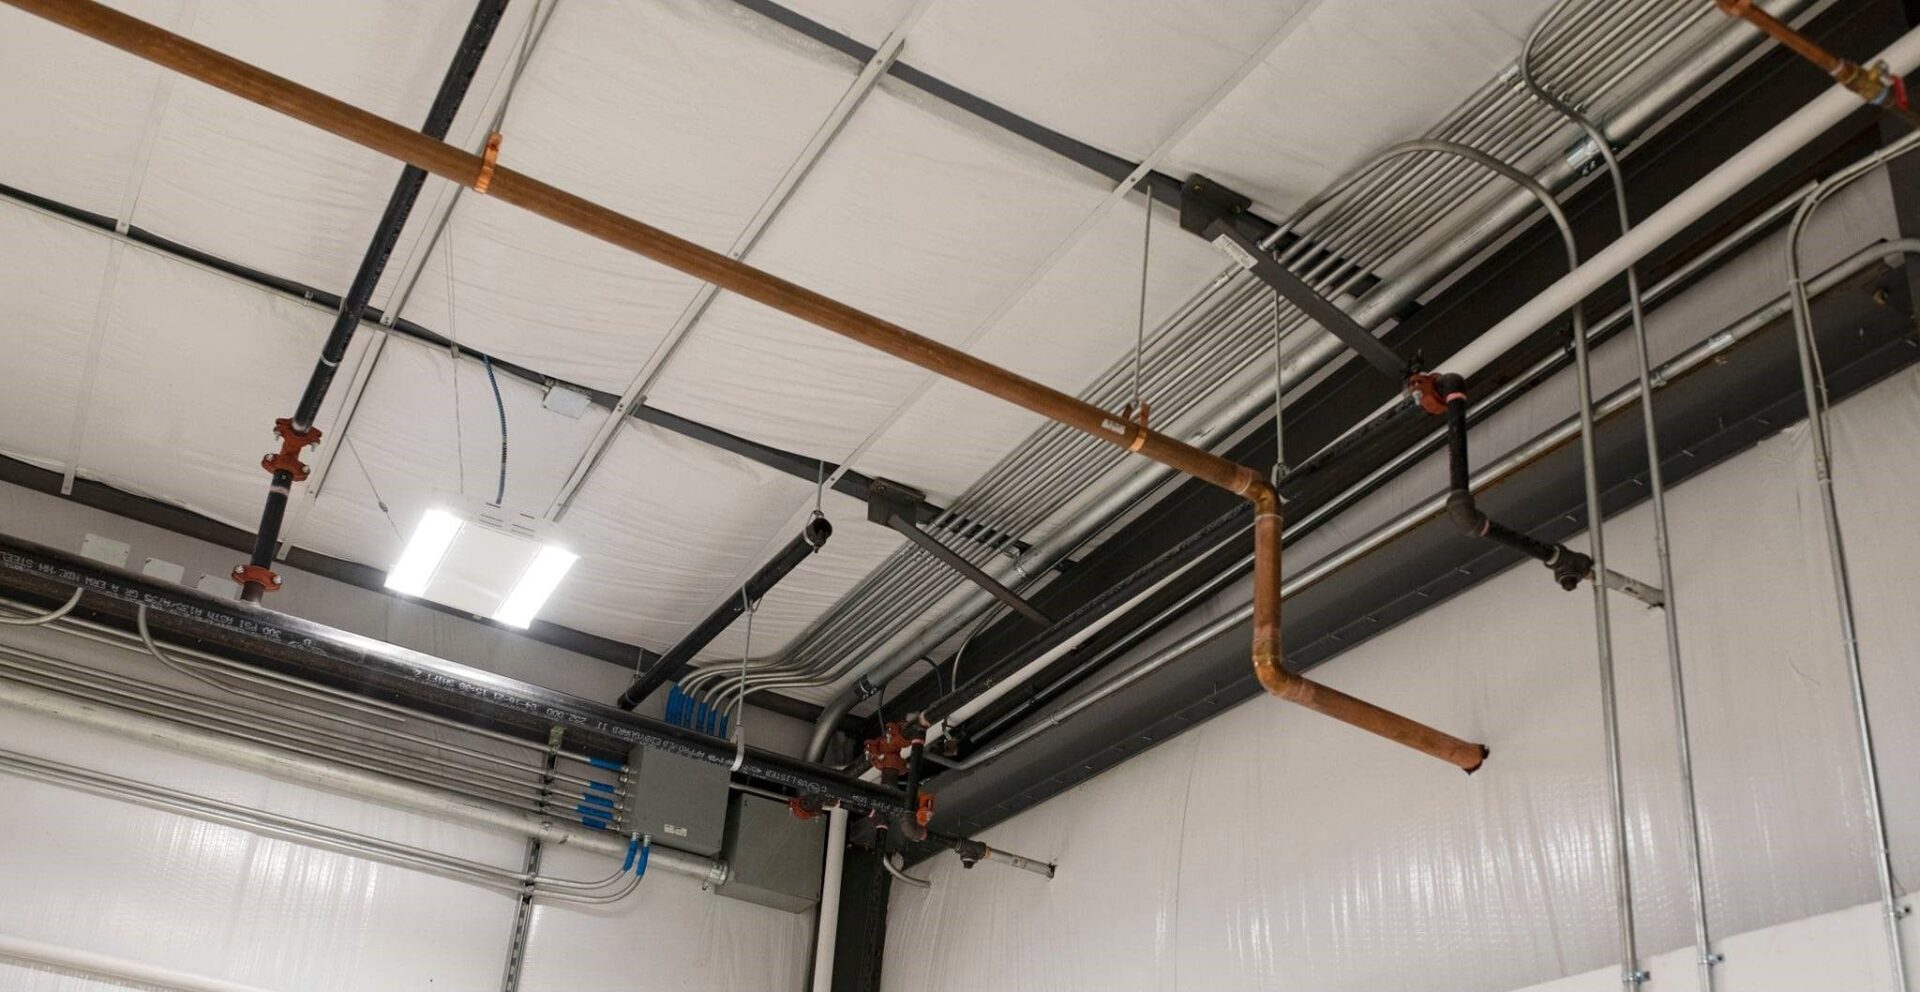 A view of pipes and wires in an industrial building.